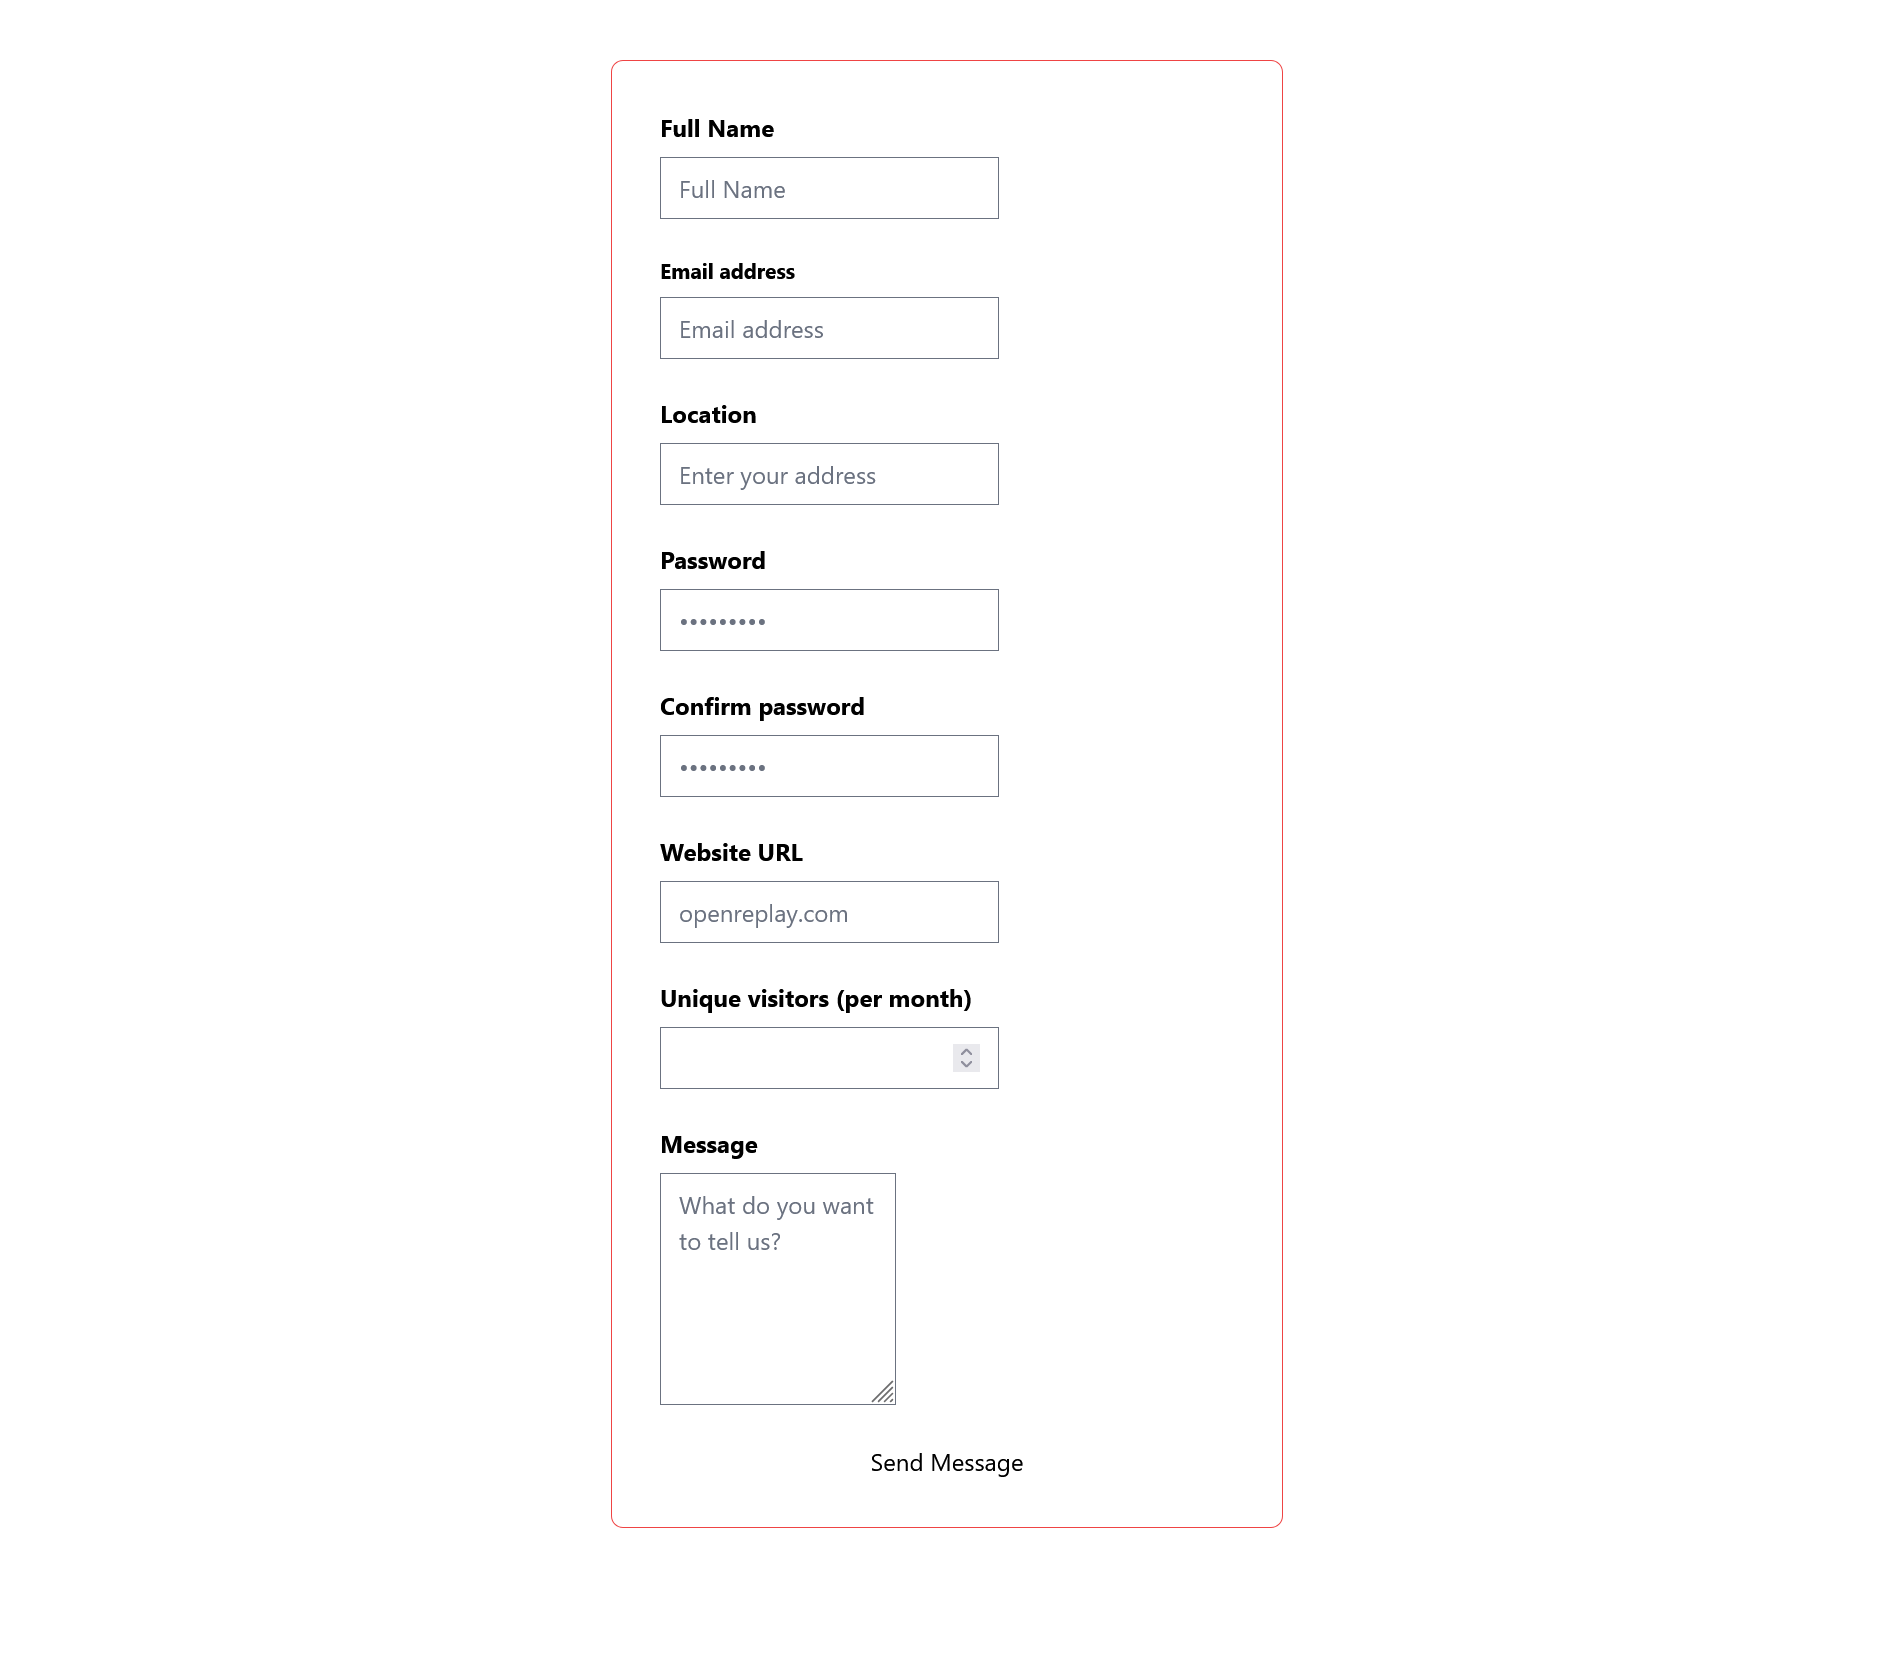 Output alt="default styling for the form plugin"